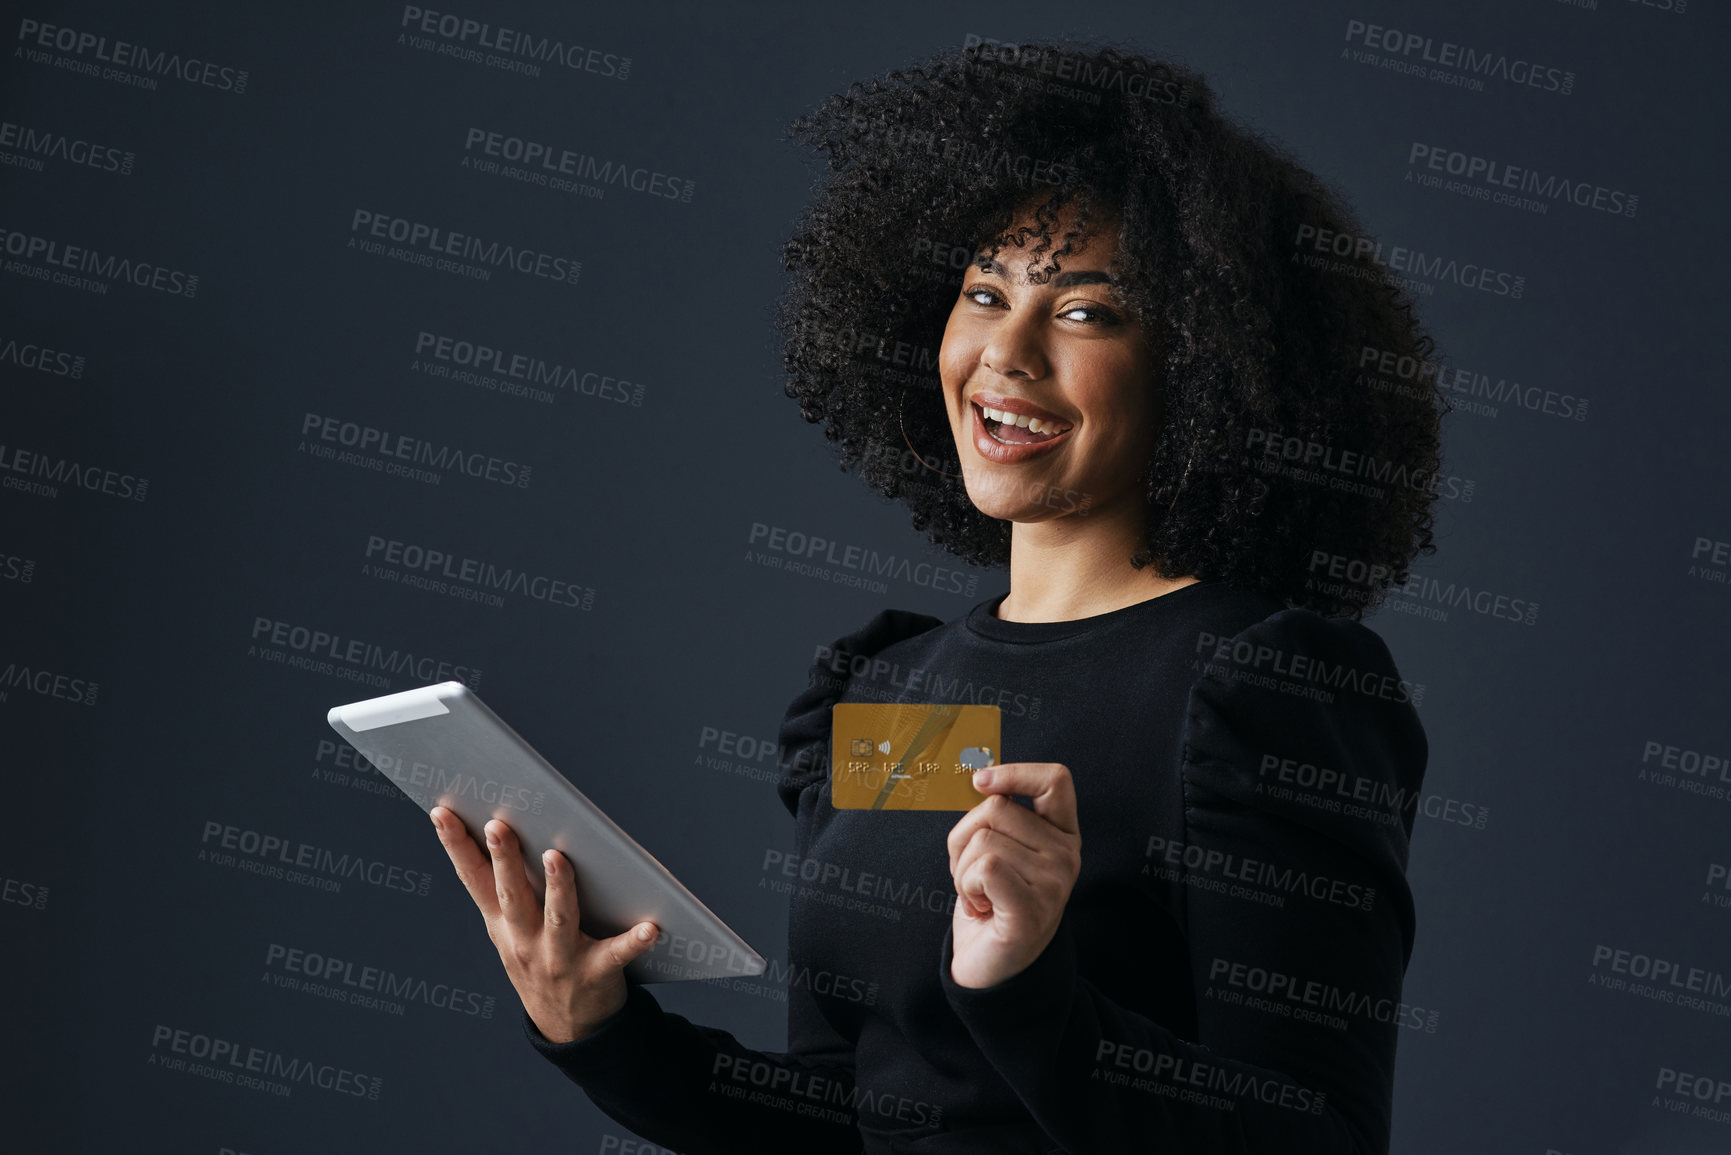 Buy stock photo Shot of a businesswoman using her tablet to shop online against a studio background